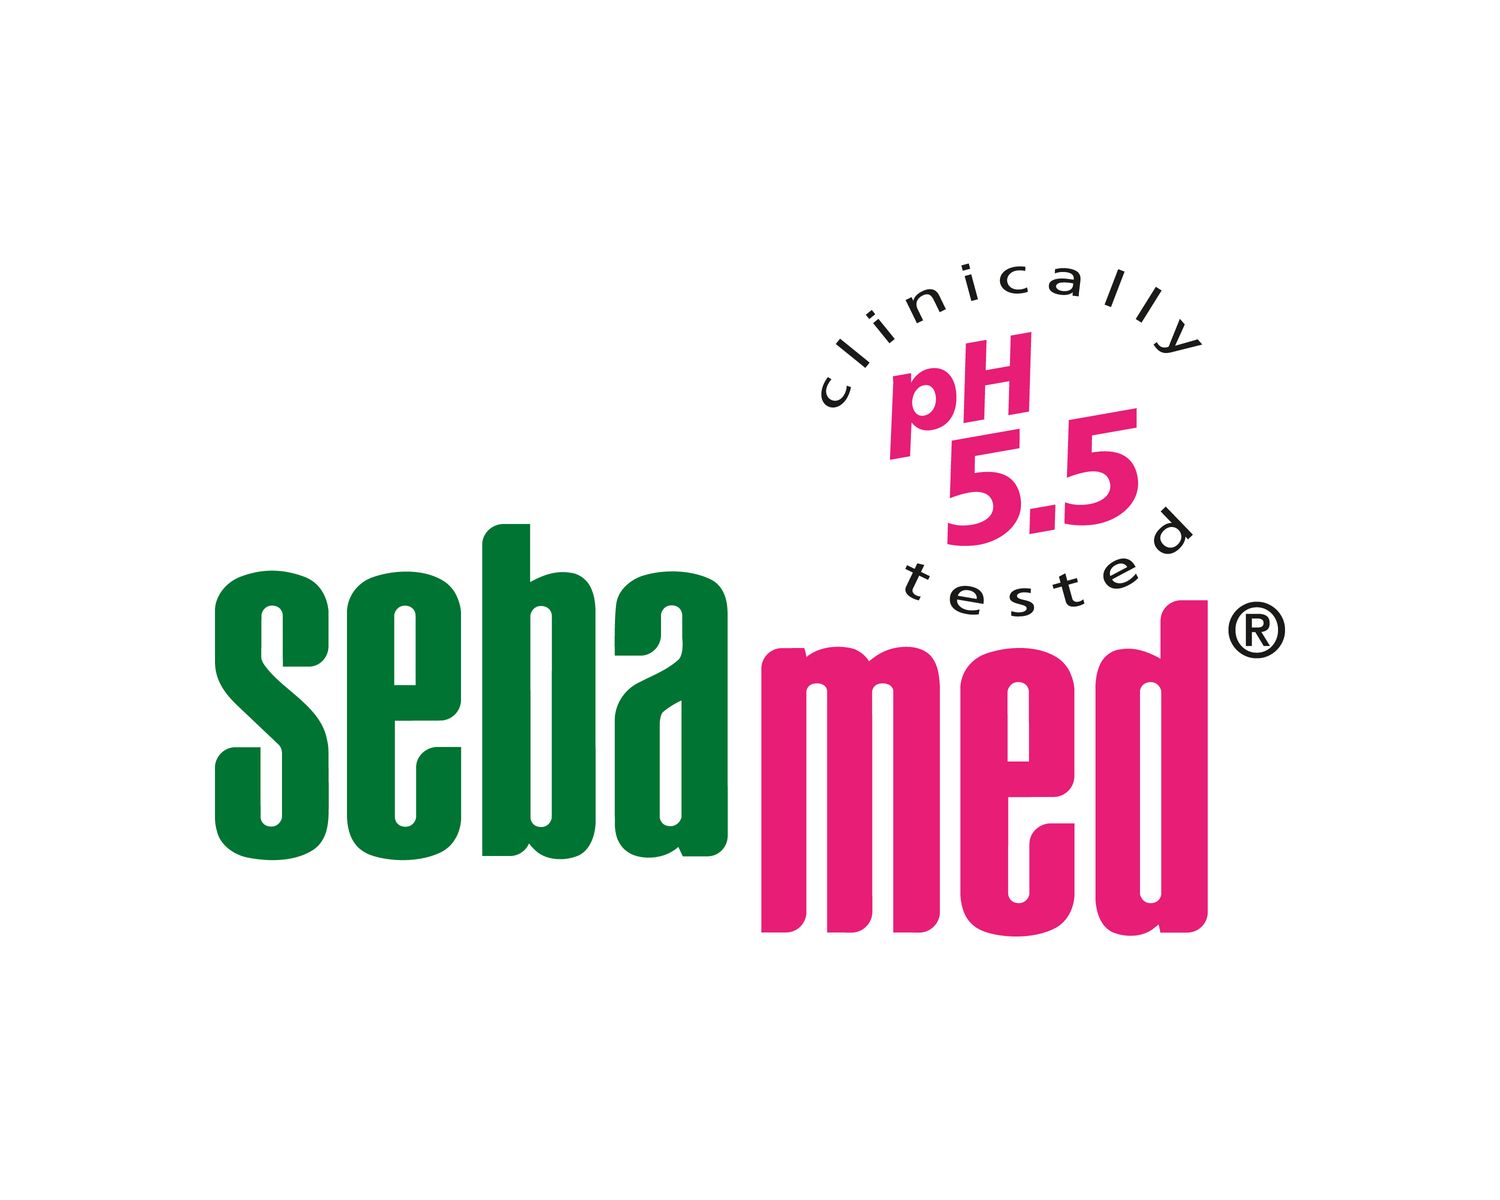 sebamed - Award winning medicinal skincare for supportive therapy in skin concerns